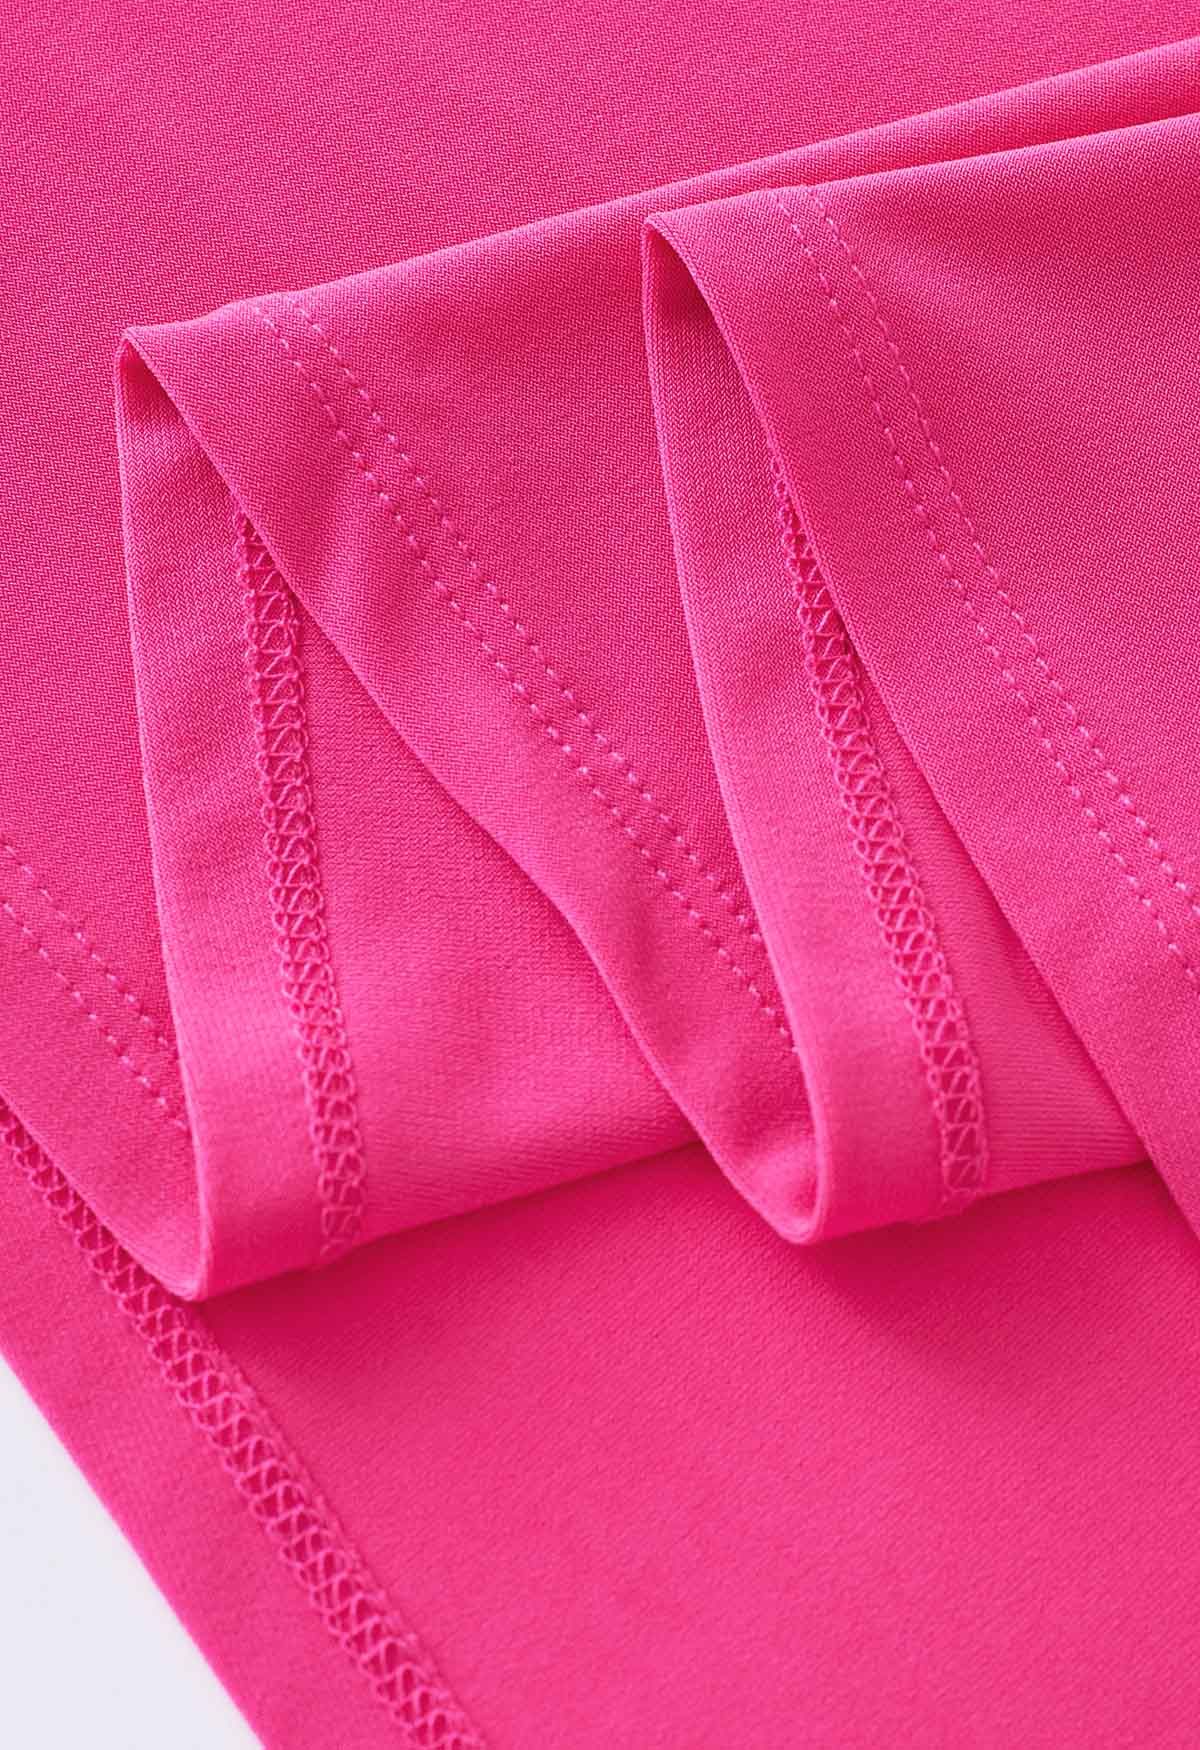 Solid Color Comfy Maxi Skirt in Hot Pink